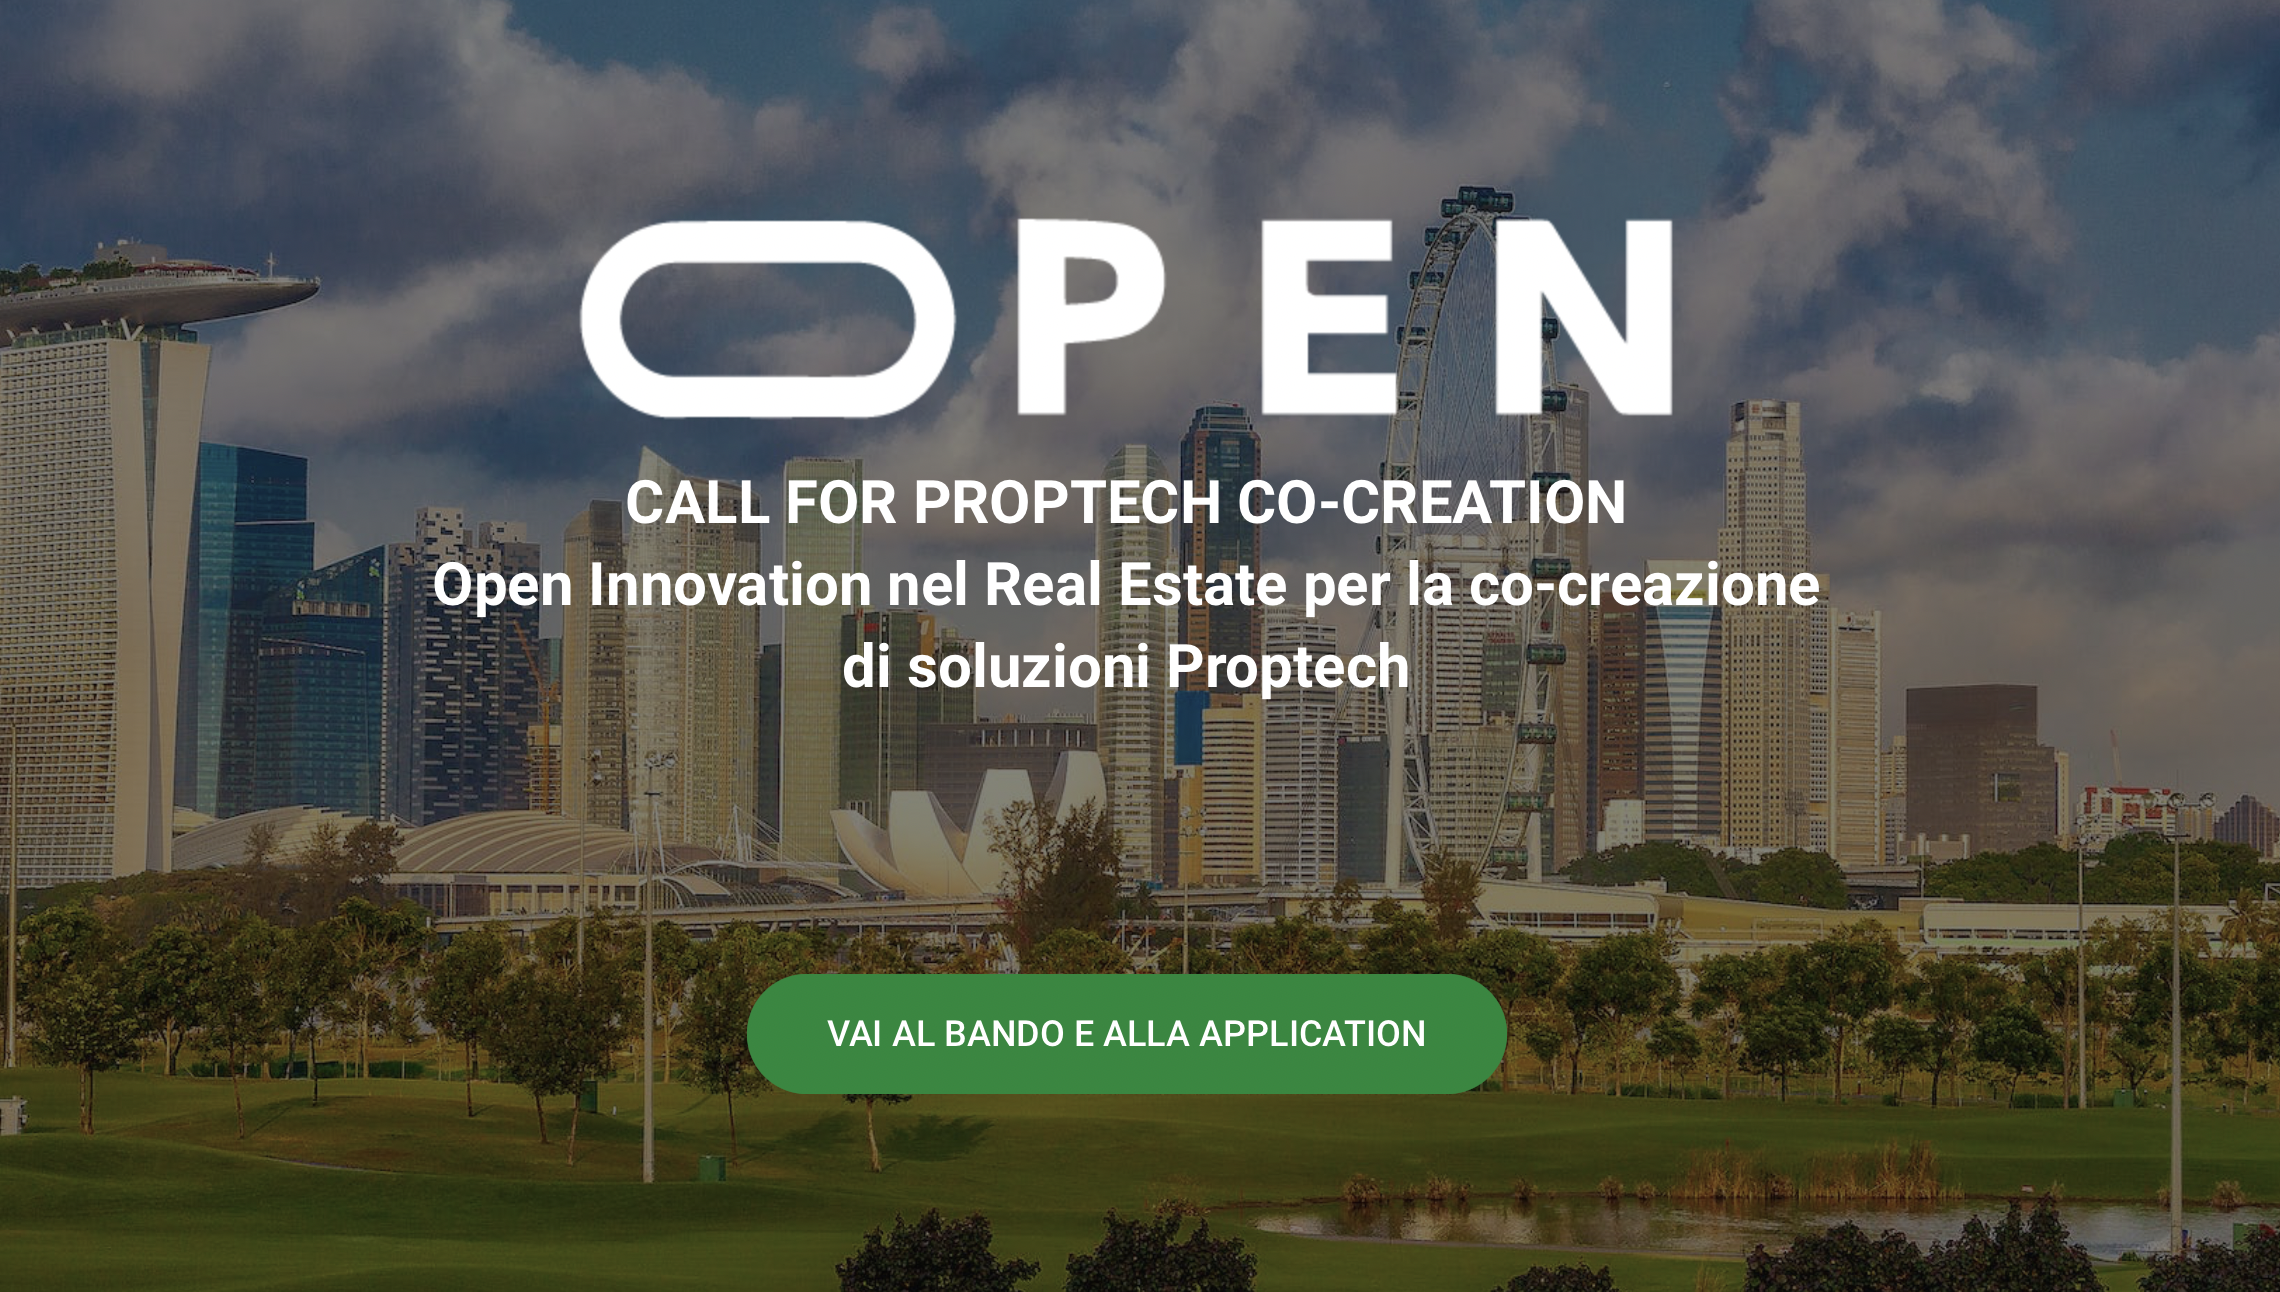 OPEN – Call for Proptech co-creation